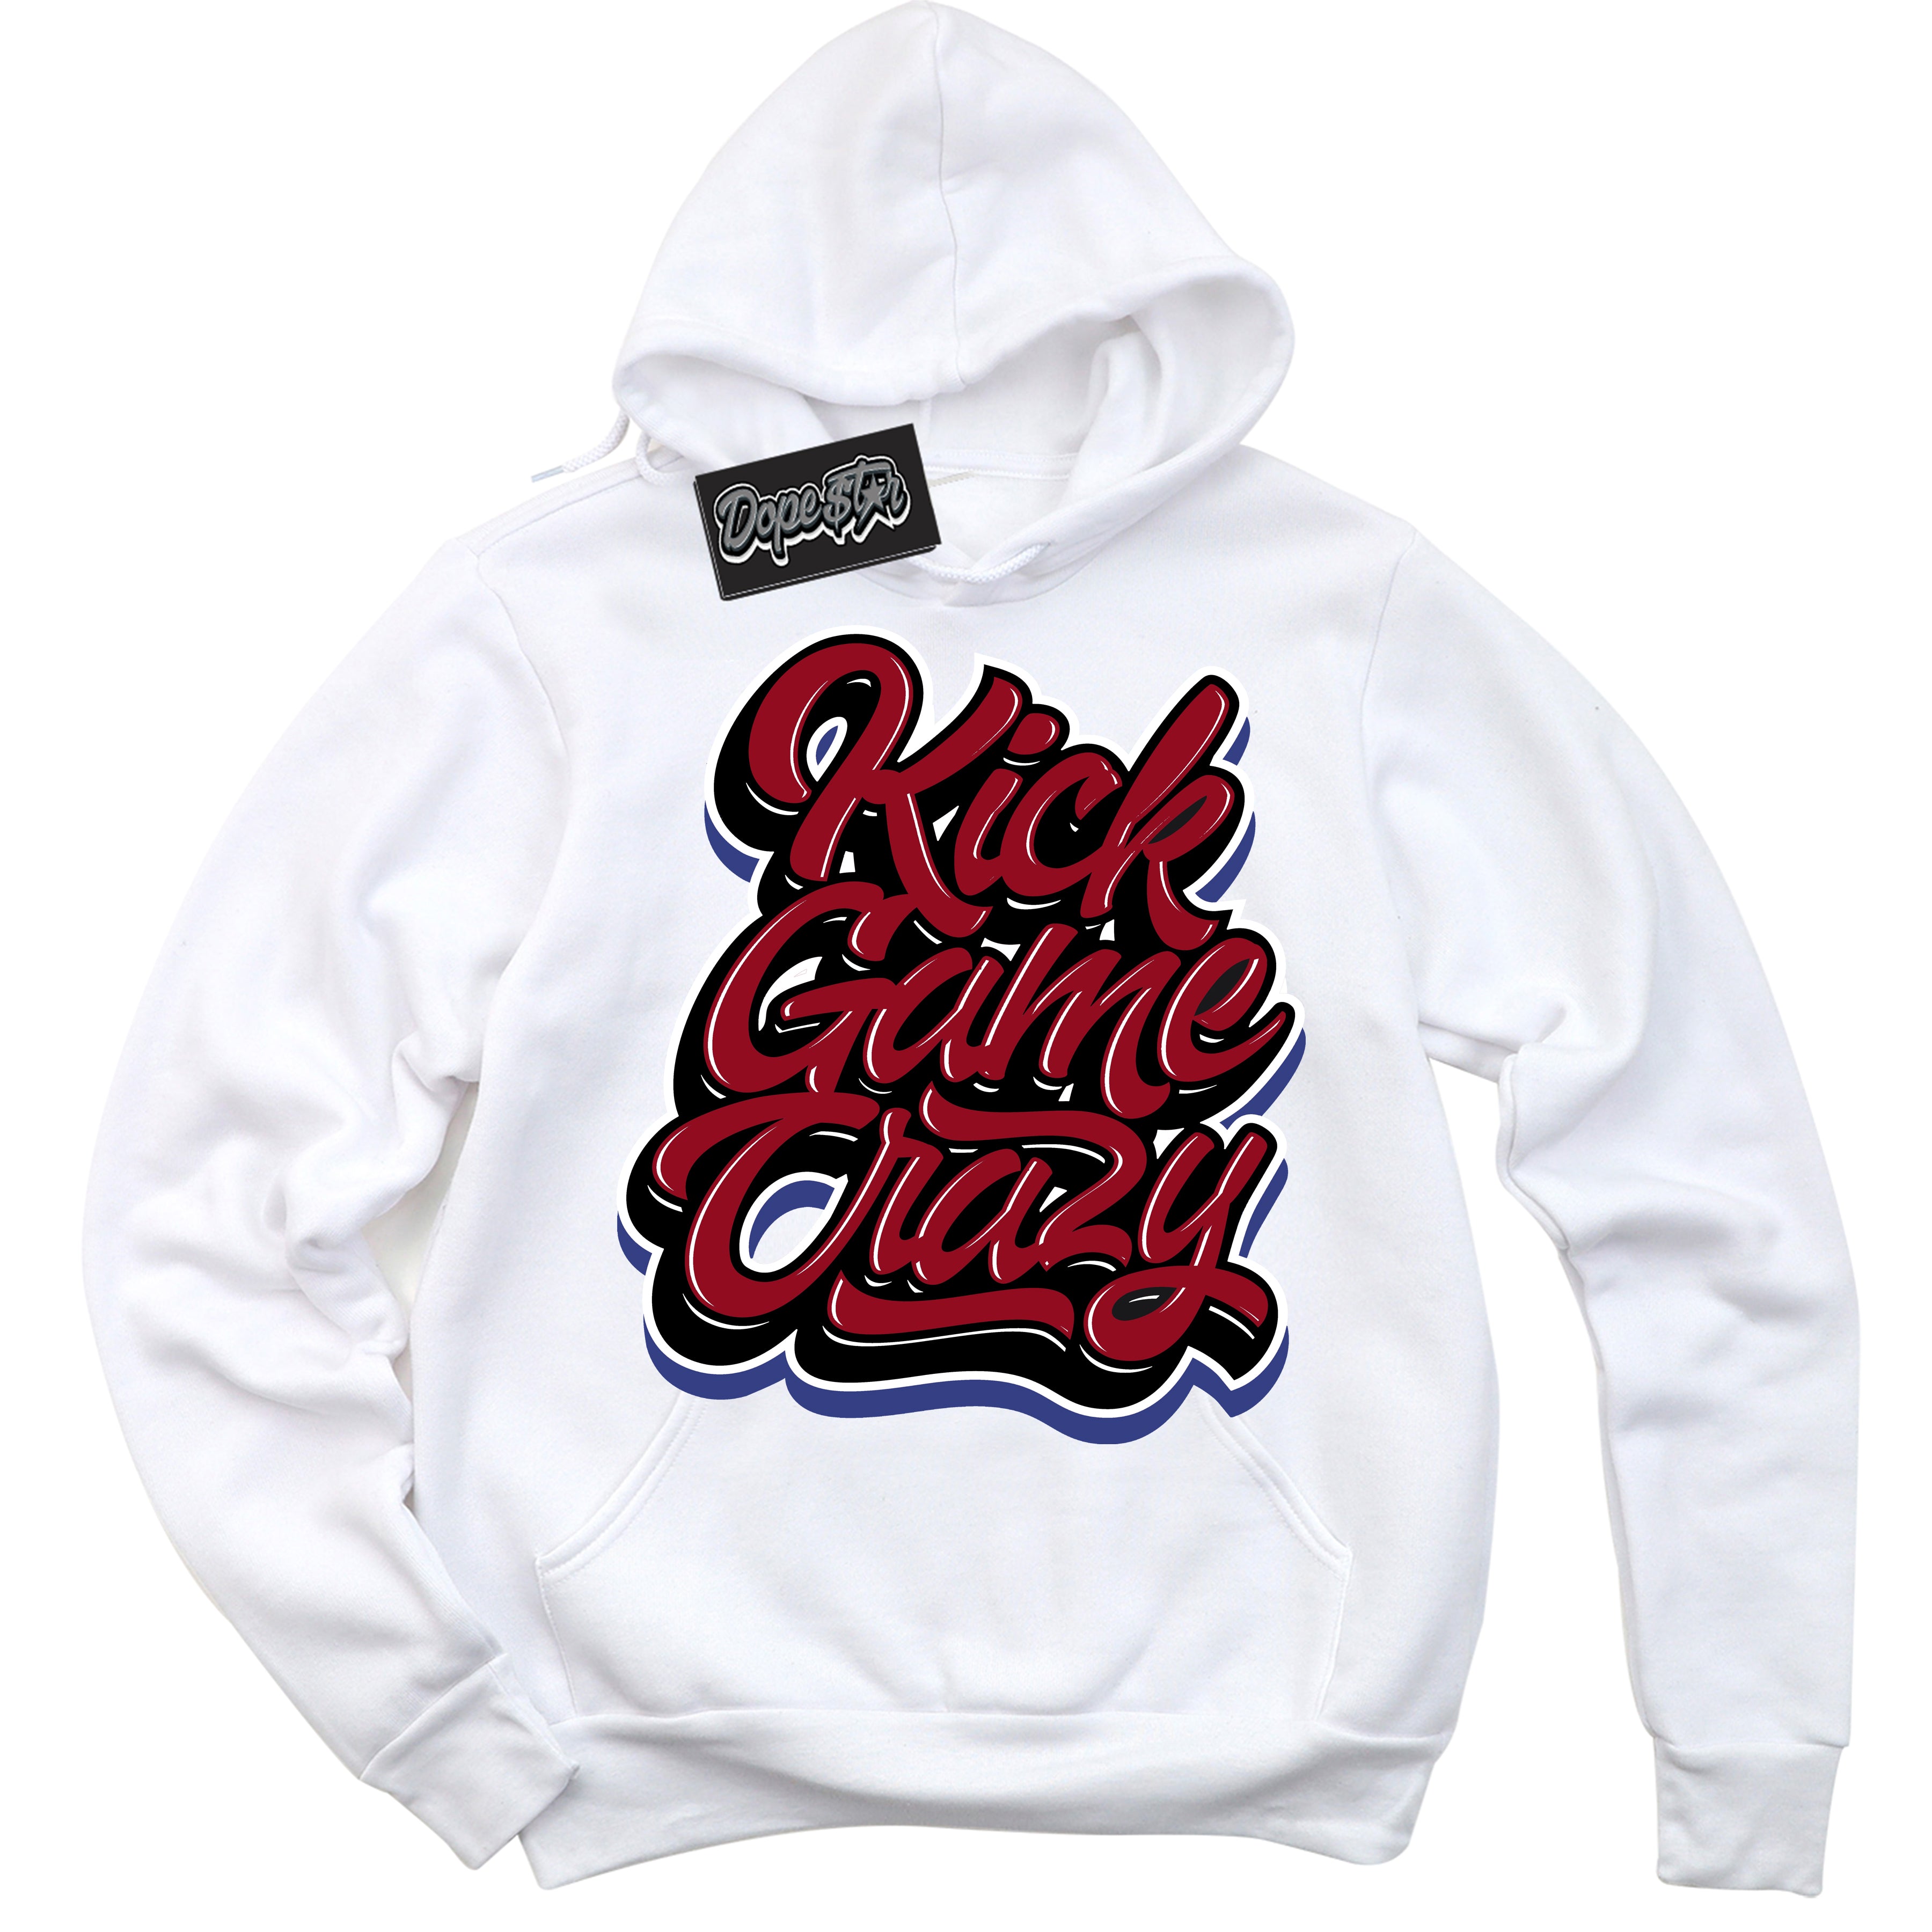 Cool White Hoodie with “ Kick Game Crazy ”  design that Perfectly Matches Playoffs 8s Sneakers.